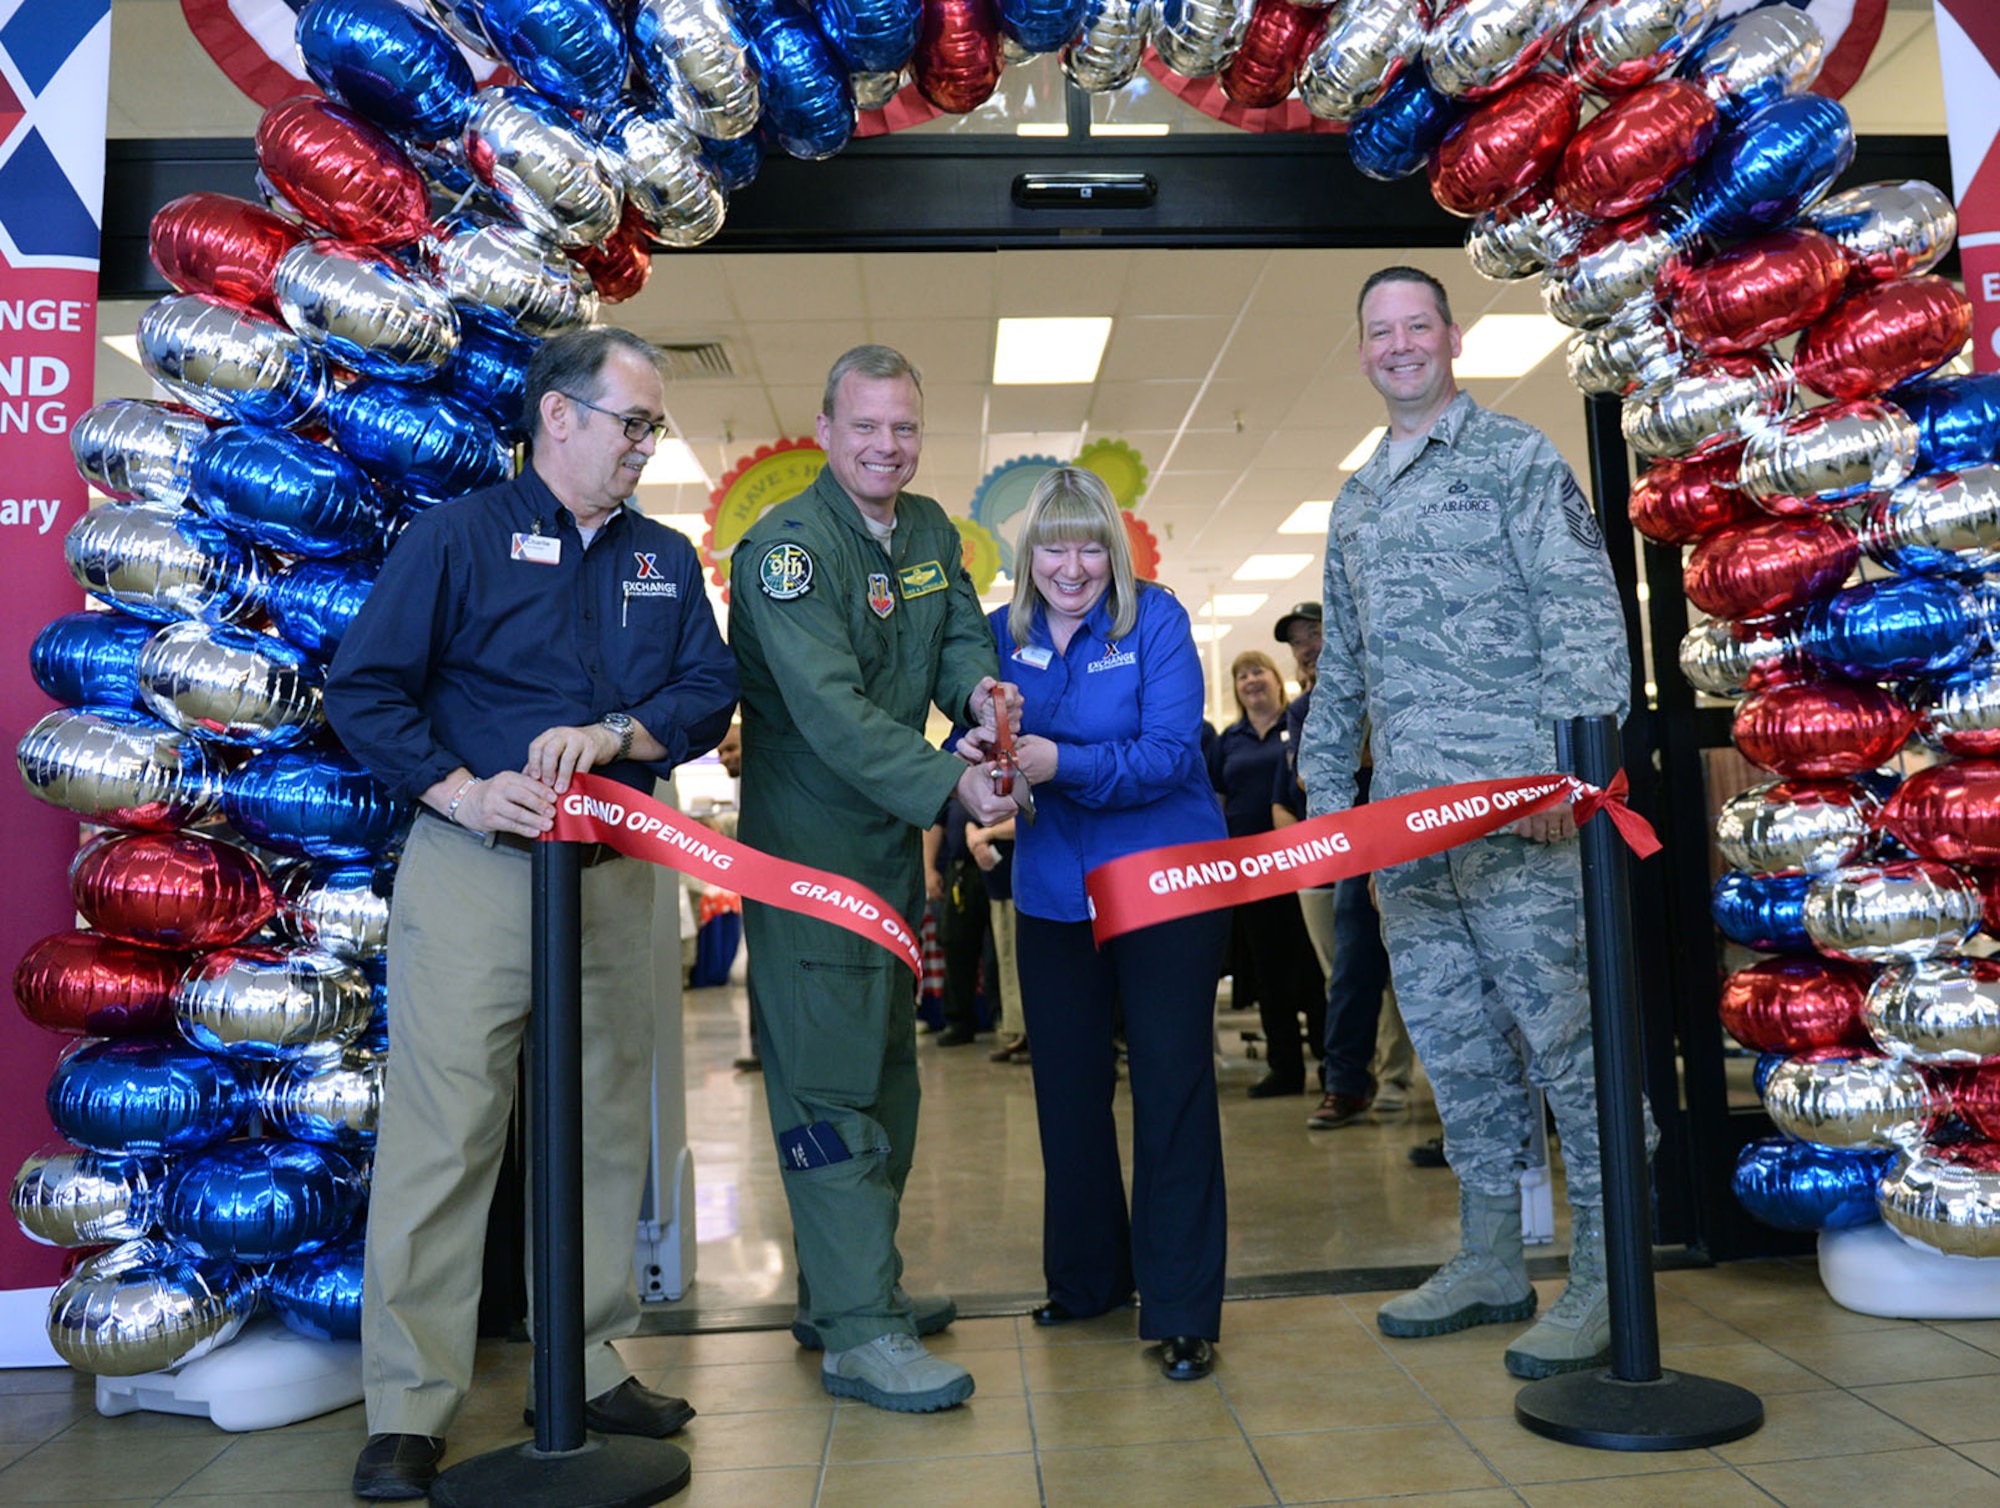 Charlie Marshall (left), base exchange store manager, Col Christopher Stricklin, 9th Reconnaissance Wing vice commander, Mary Omler, BX general manager, and Chief Master Sgt. Randy Kwiatkowski (right), 9th RW command chief, cut the ribbon at Beale Air Force Base Exchange grand reopening Feb. 25, 2016. The approximate $1.9 million project included new flooring, a floor plan to accommodate an expanded product line, new displays and a new central checkout location.